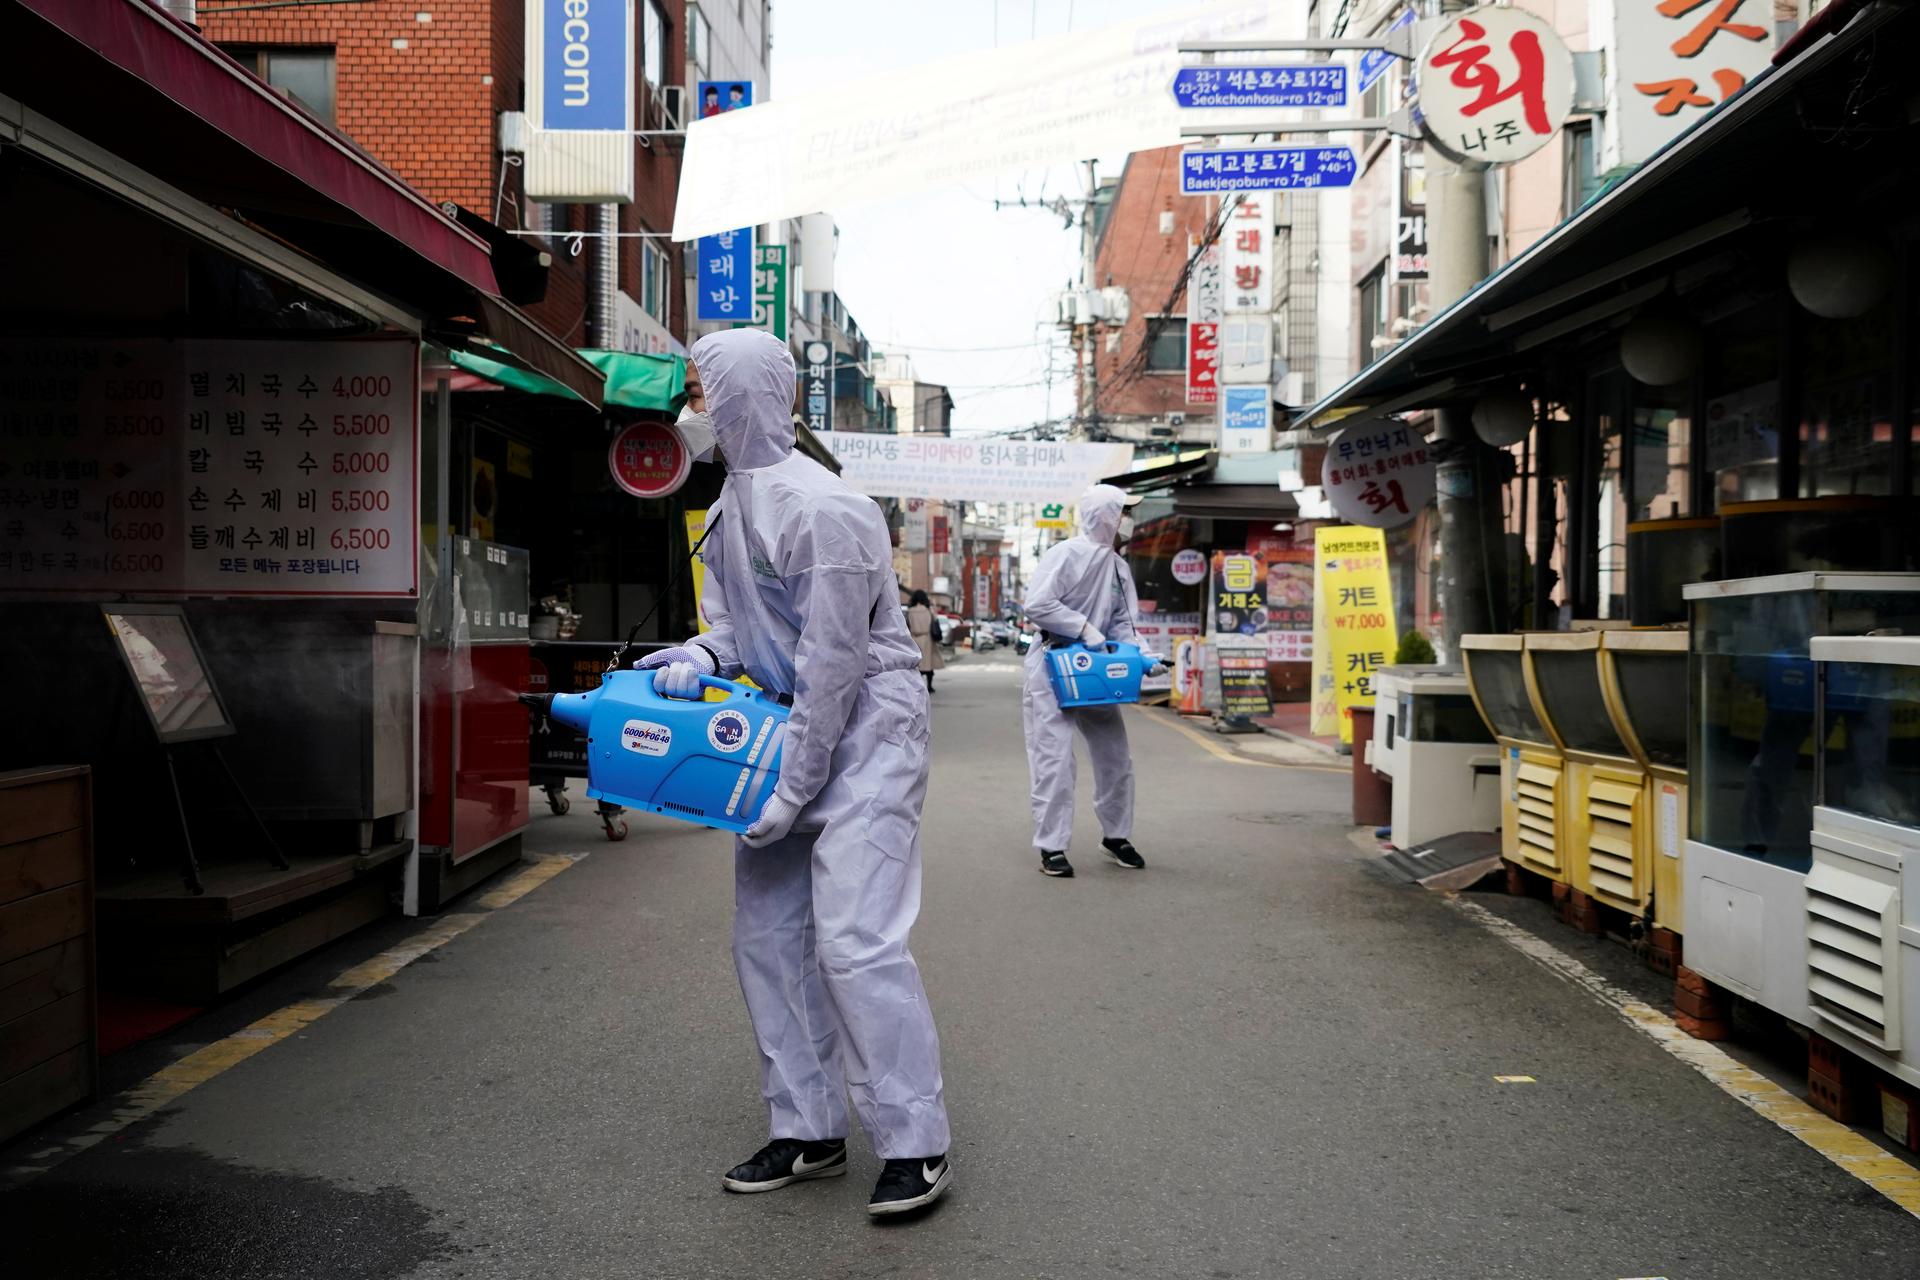 South Koreans told to stay home as coronavirus infections surpass 3,100